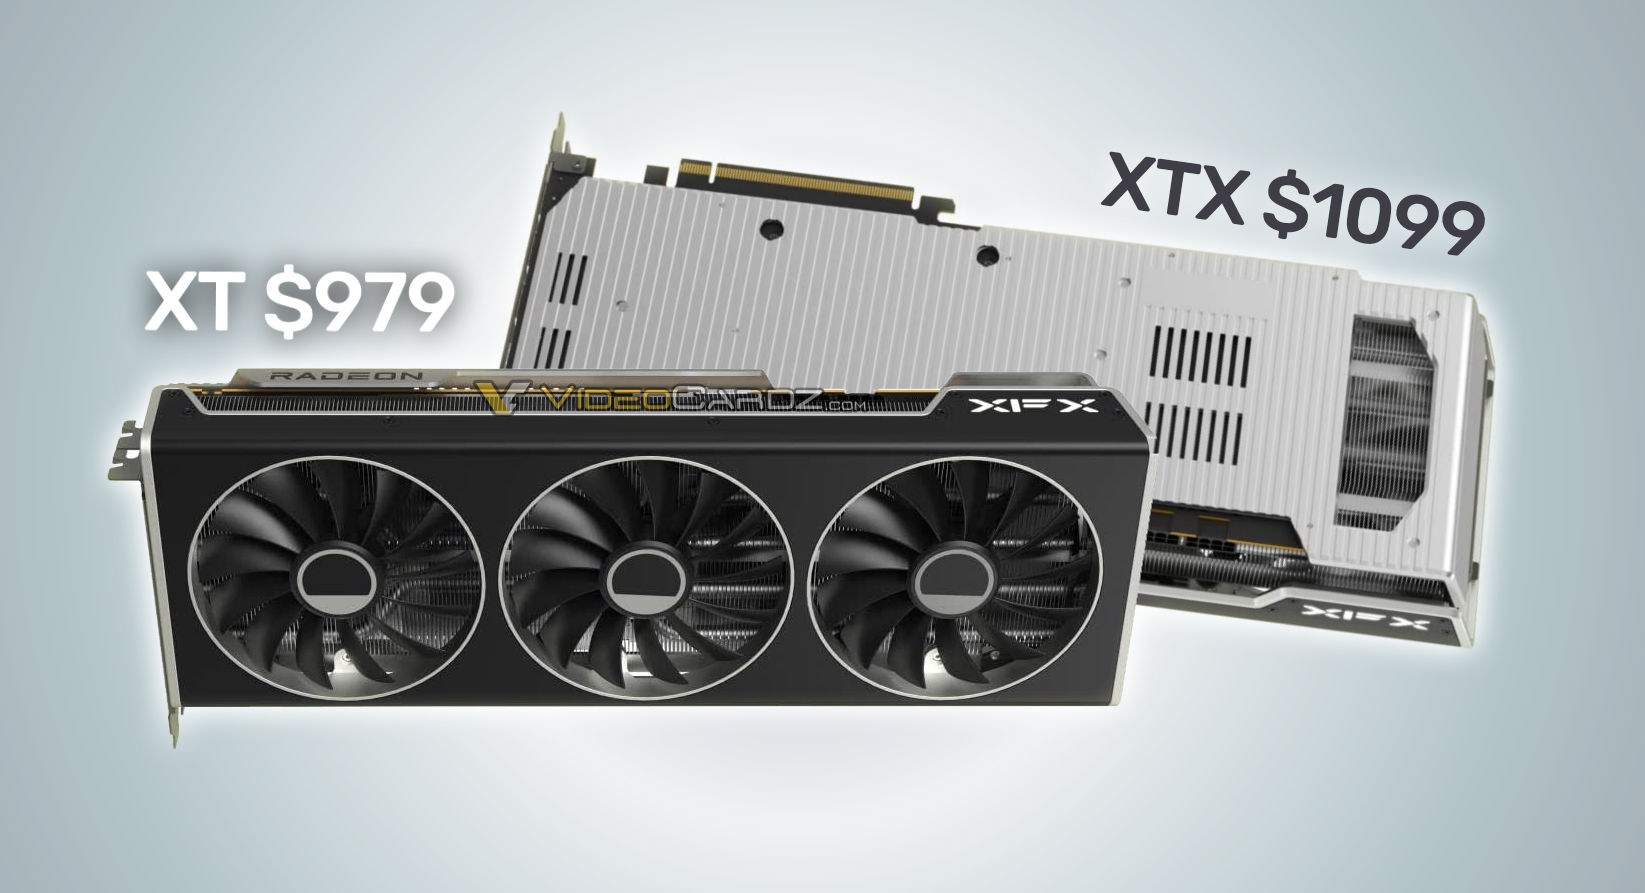 Custom XFX Radeon RX 7900 XTX card has been listed for $1099 by , XT  variant for $979 